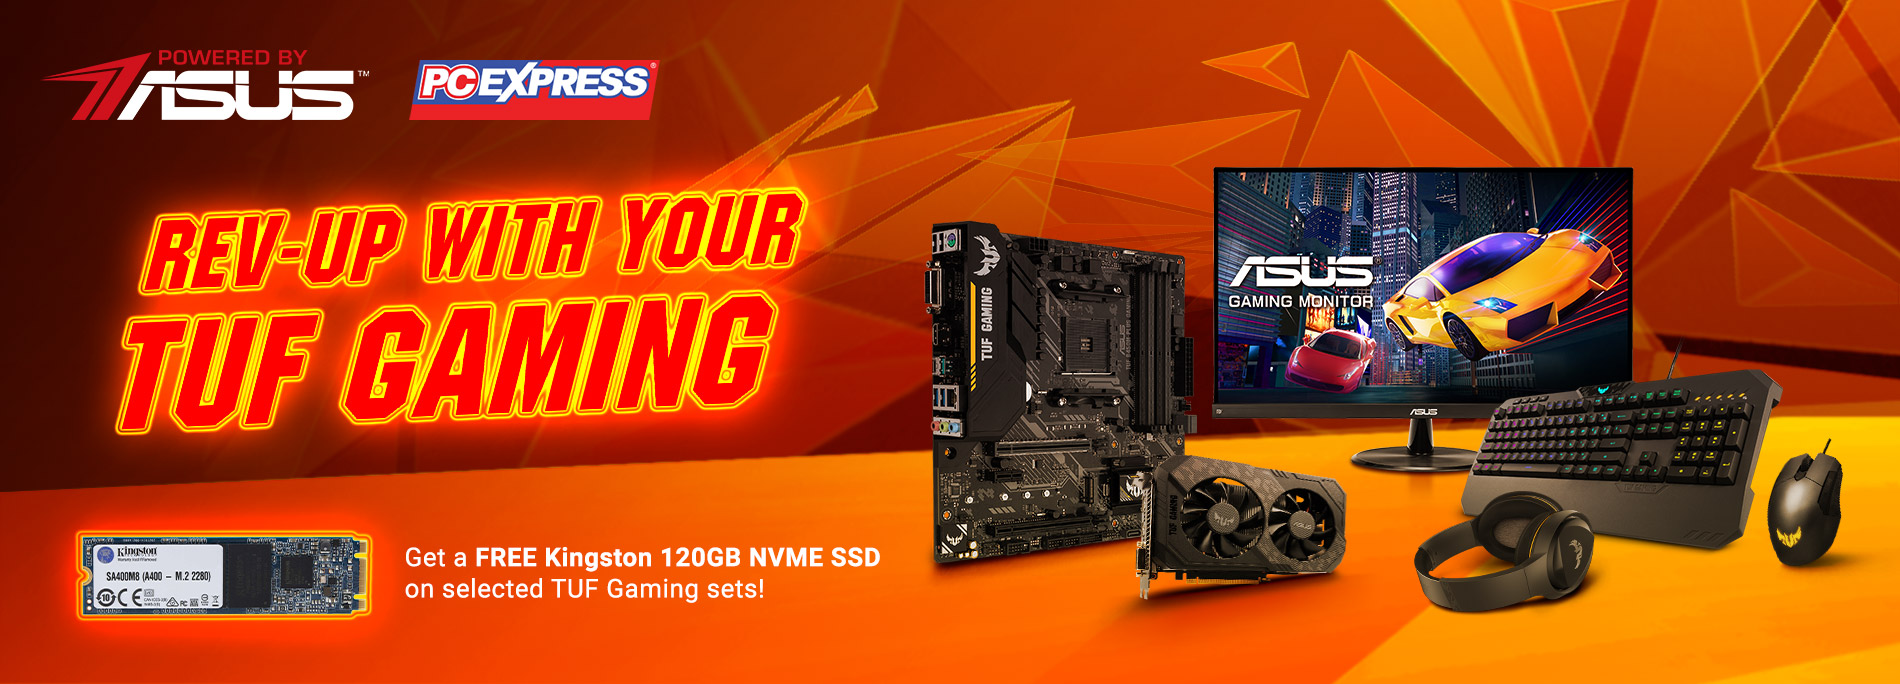 PC Express Powered By ASUS Promotion